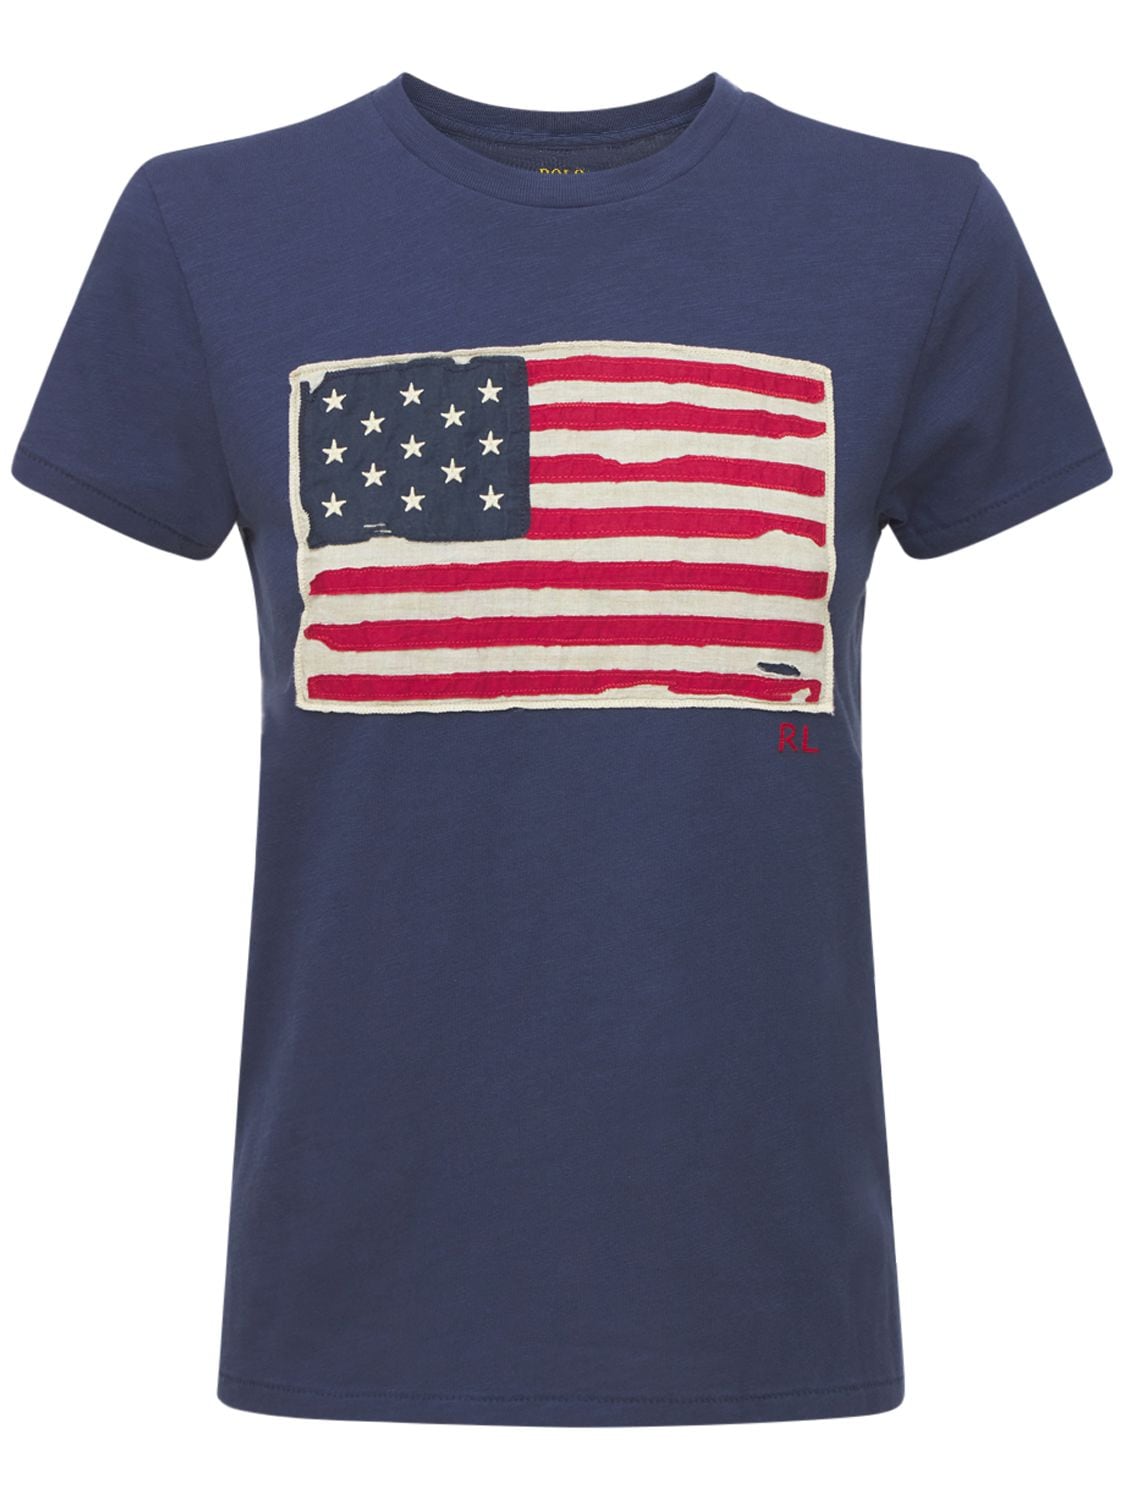 POLO RALPH LAUREN AMERICAN FLAG PRINTED COTTON T-SHIRT,74IE50003-MDAY0